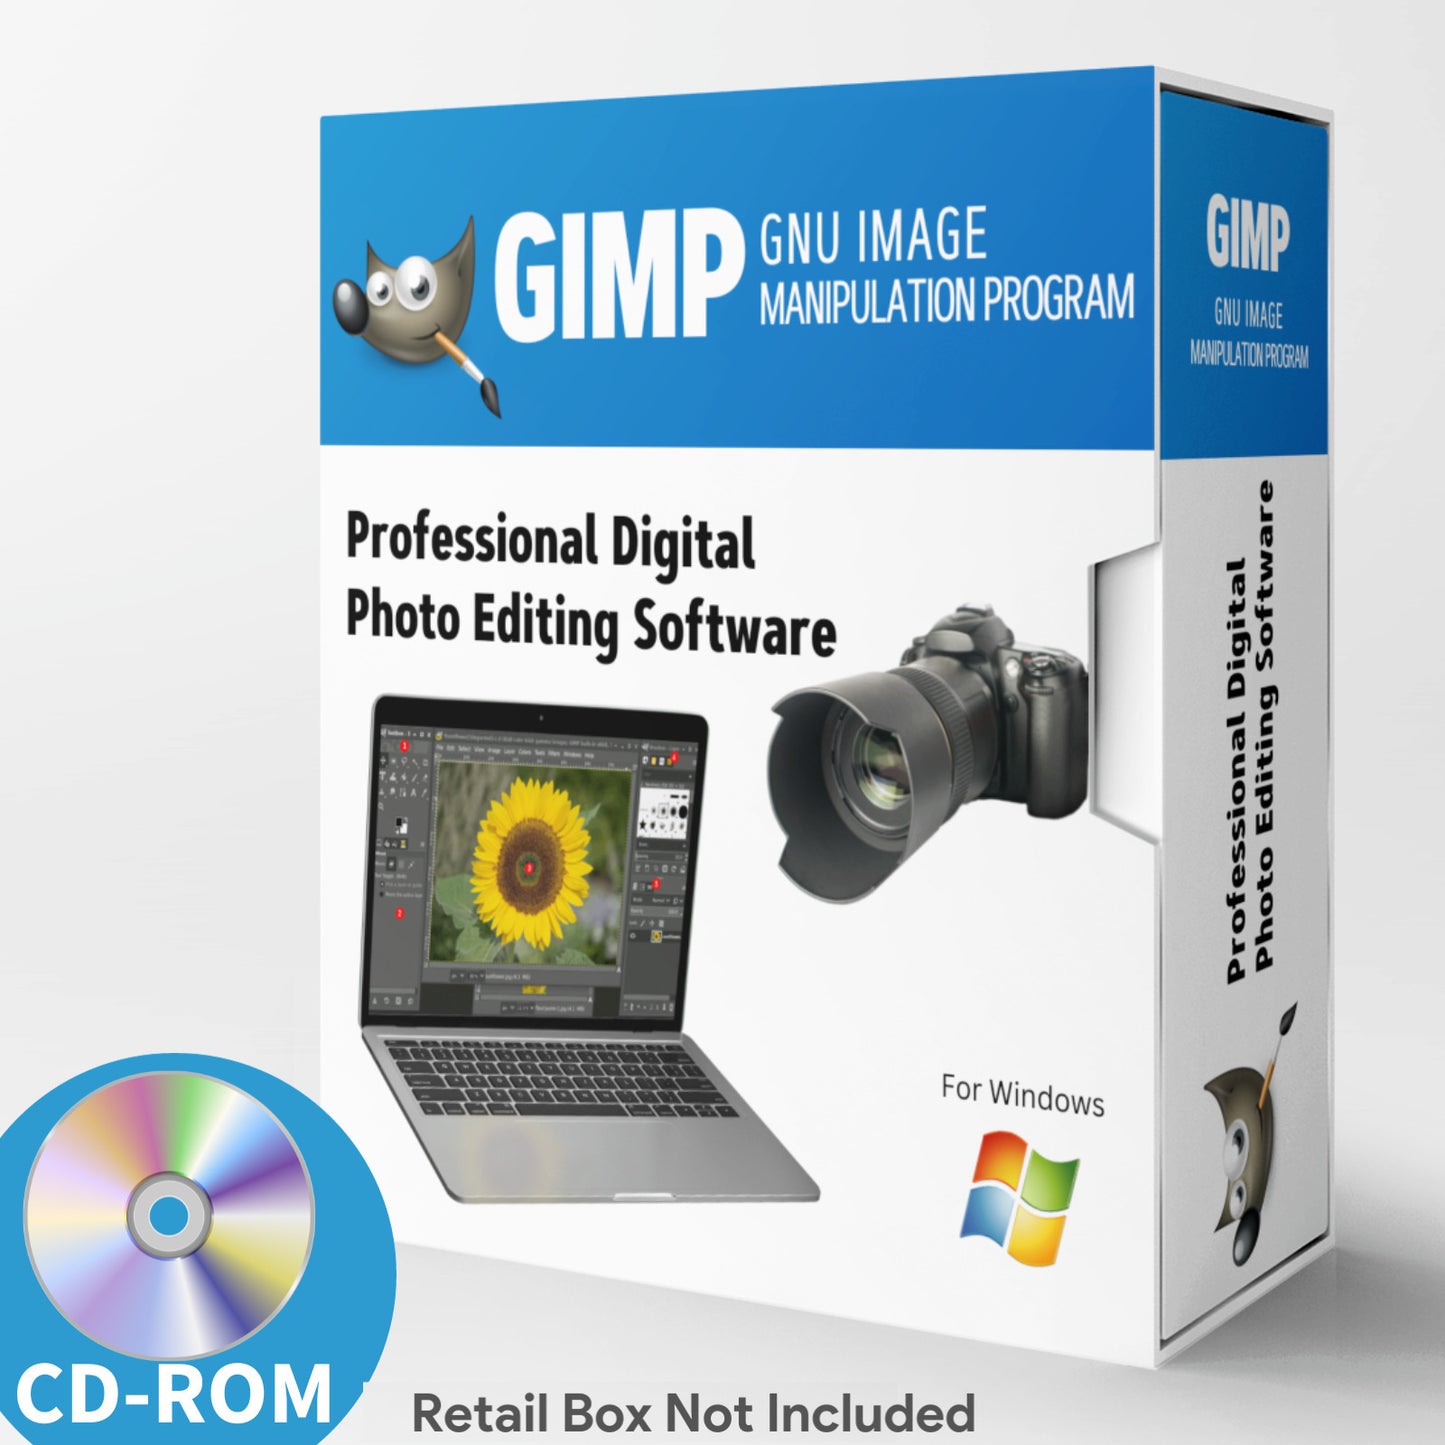 GIMP PRO Photo Graphic Design Image Editing Software for Windows (w/ Photo shop Guide) on CD